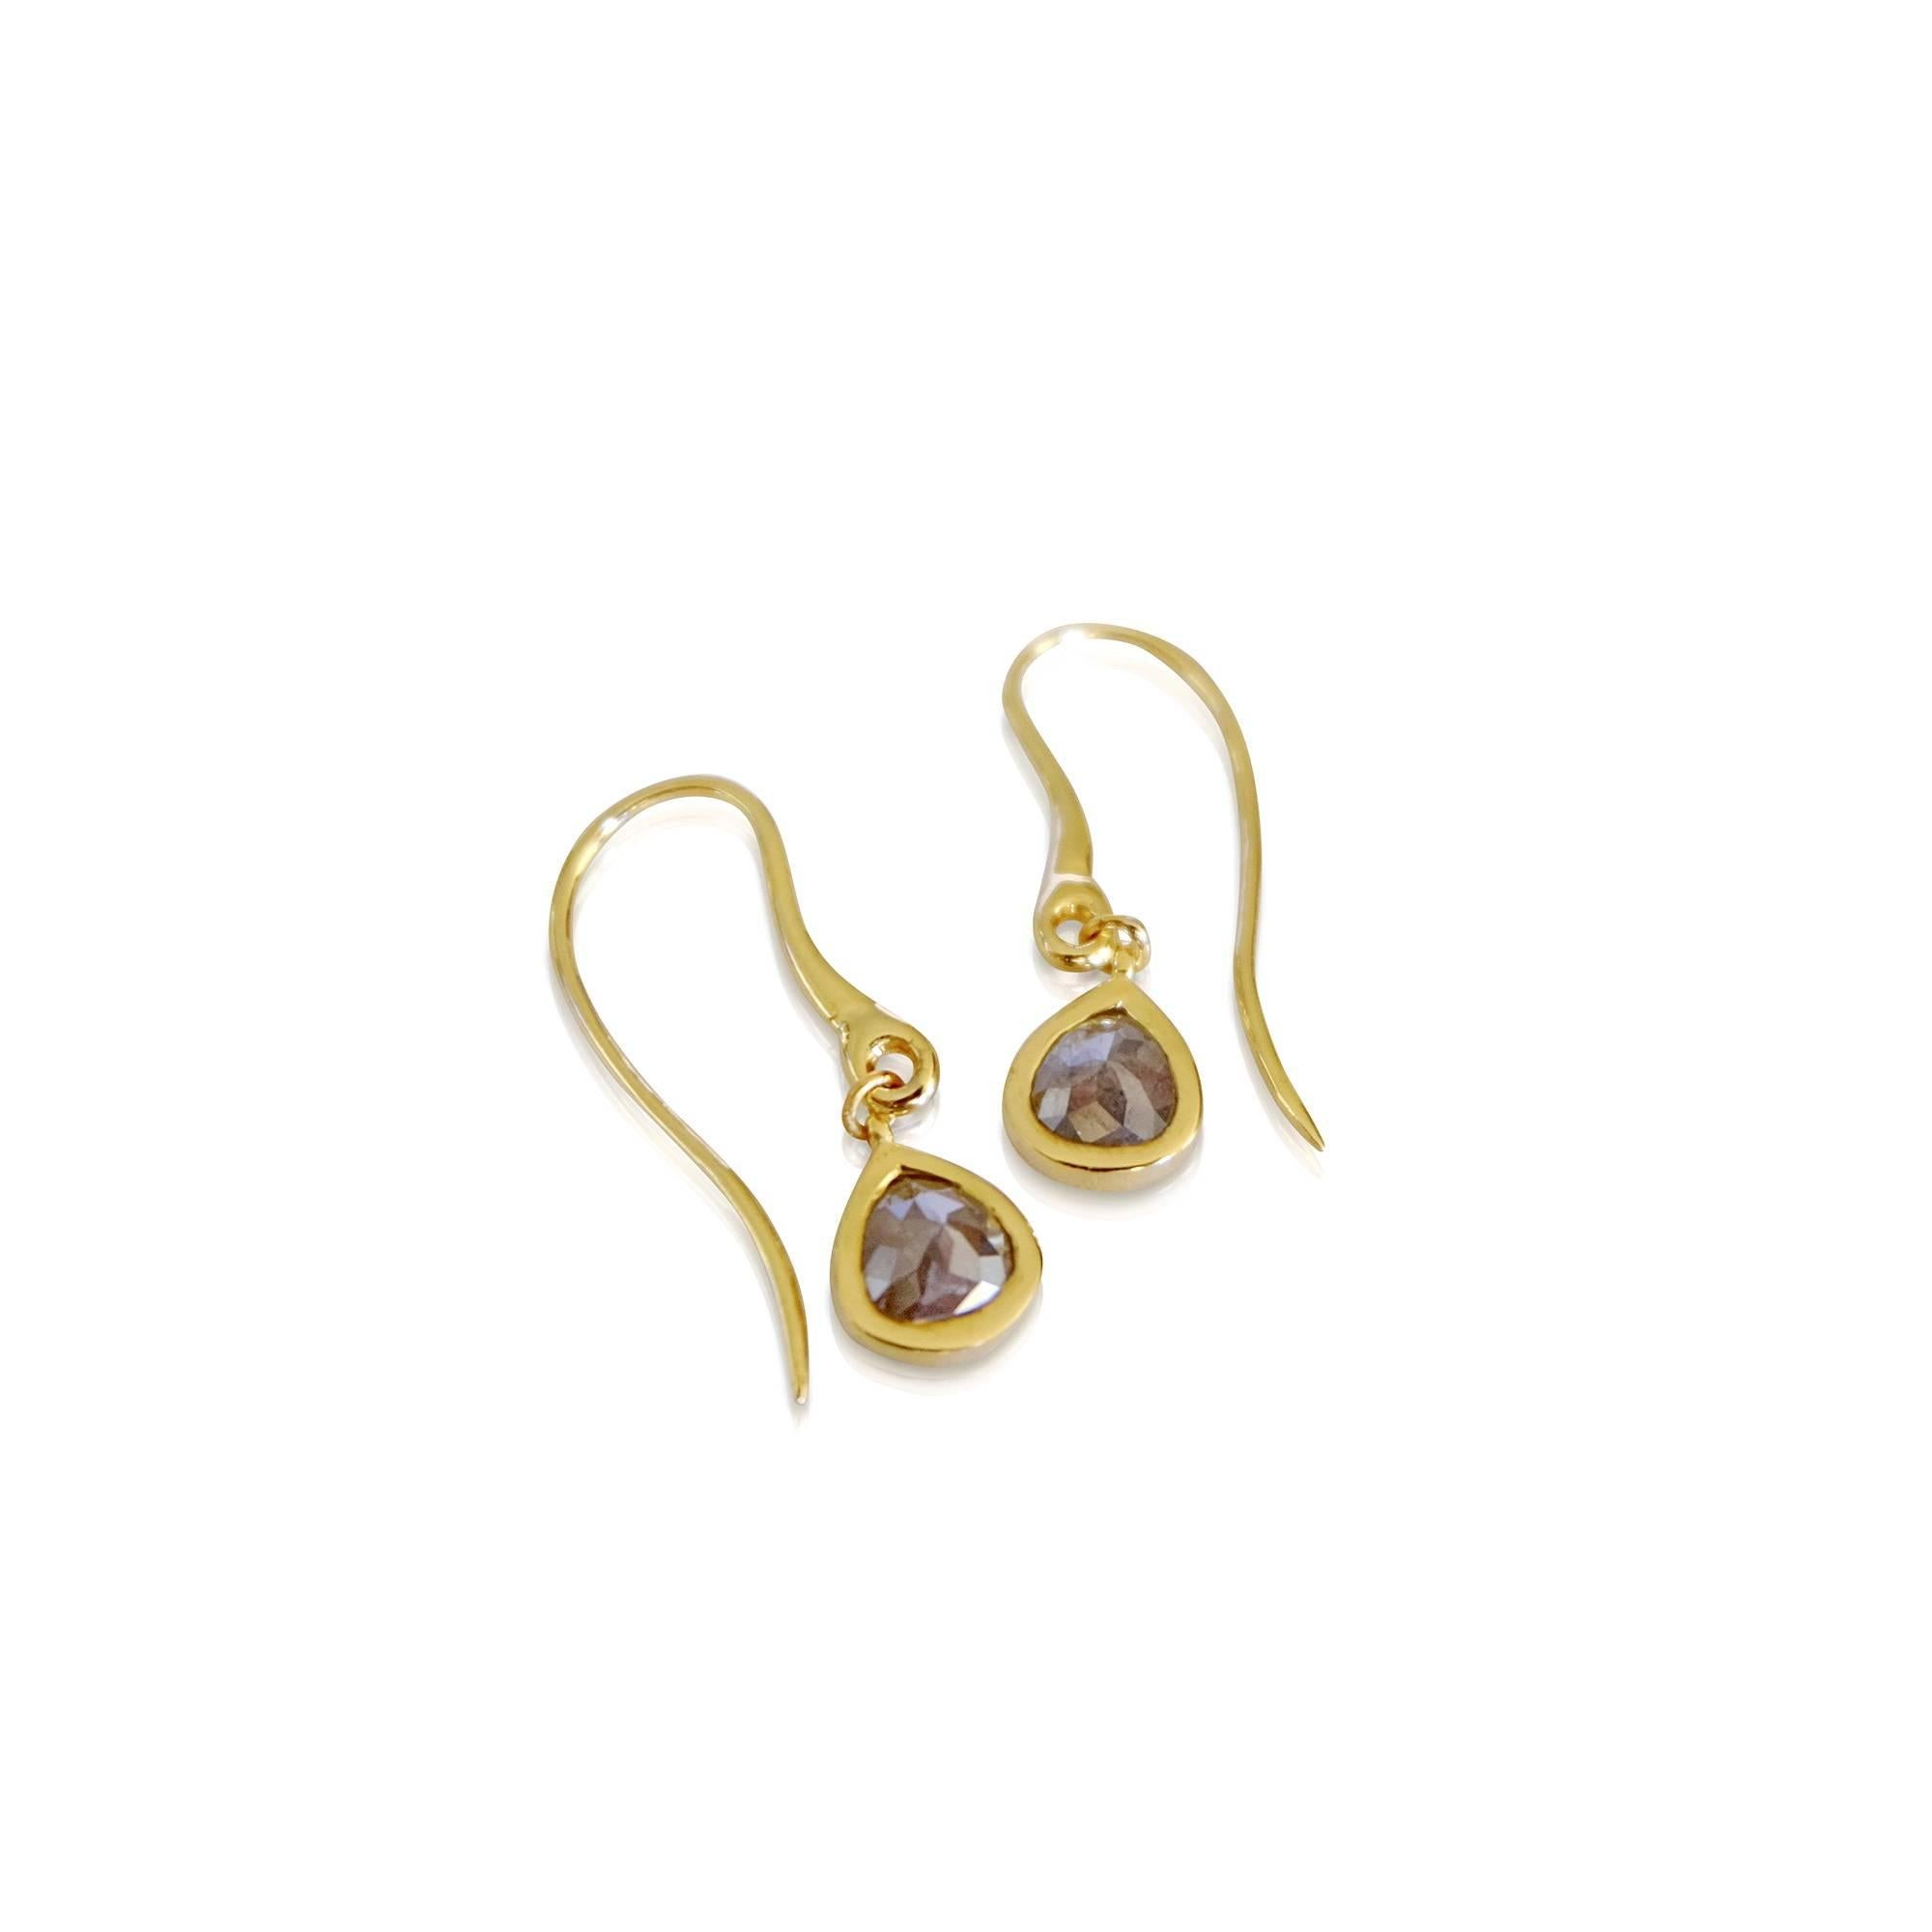 Luca Jouel Rose Cut Pear Diamond Drop Earrings in Yellow Gold In New Condition For Sale In South Perth, AU